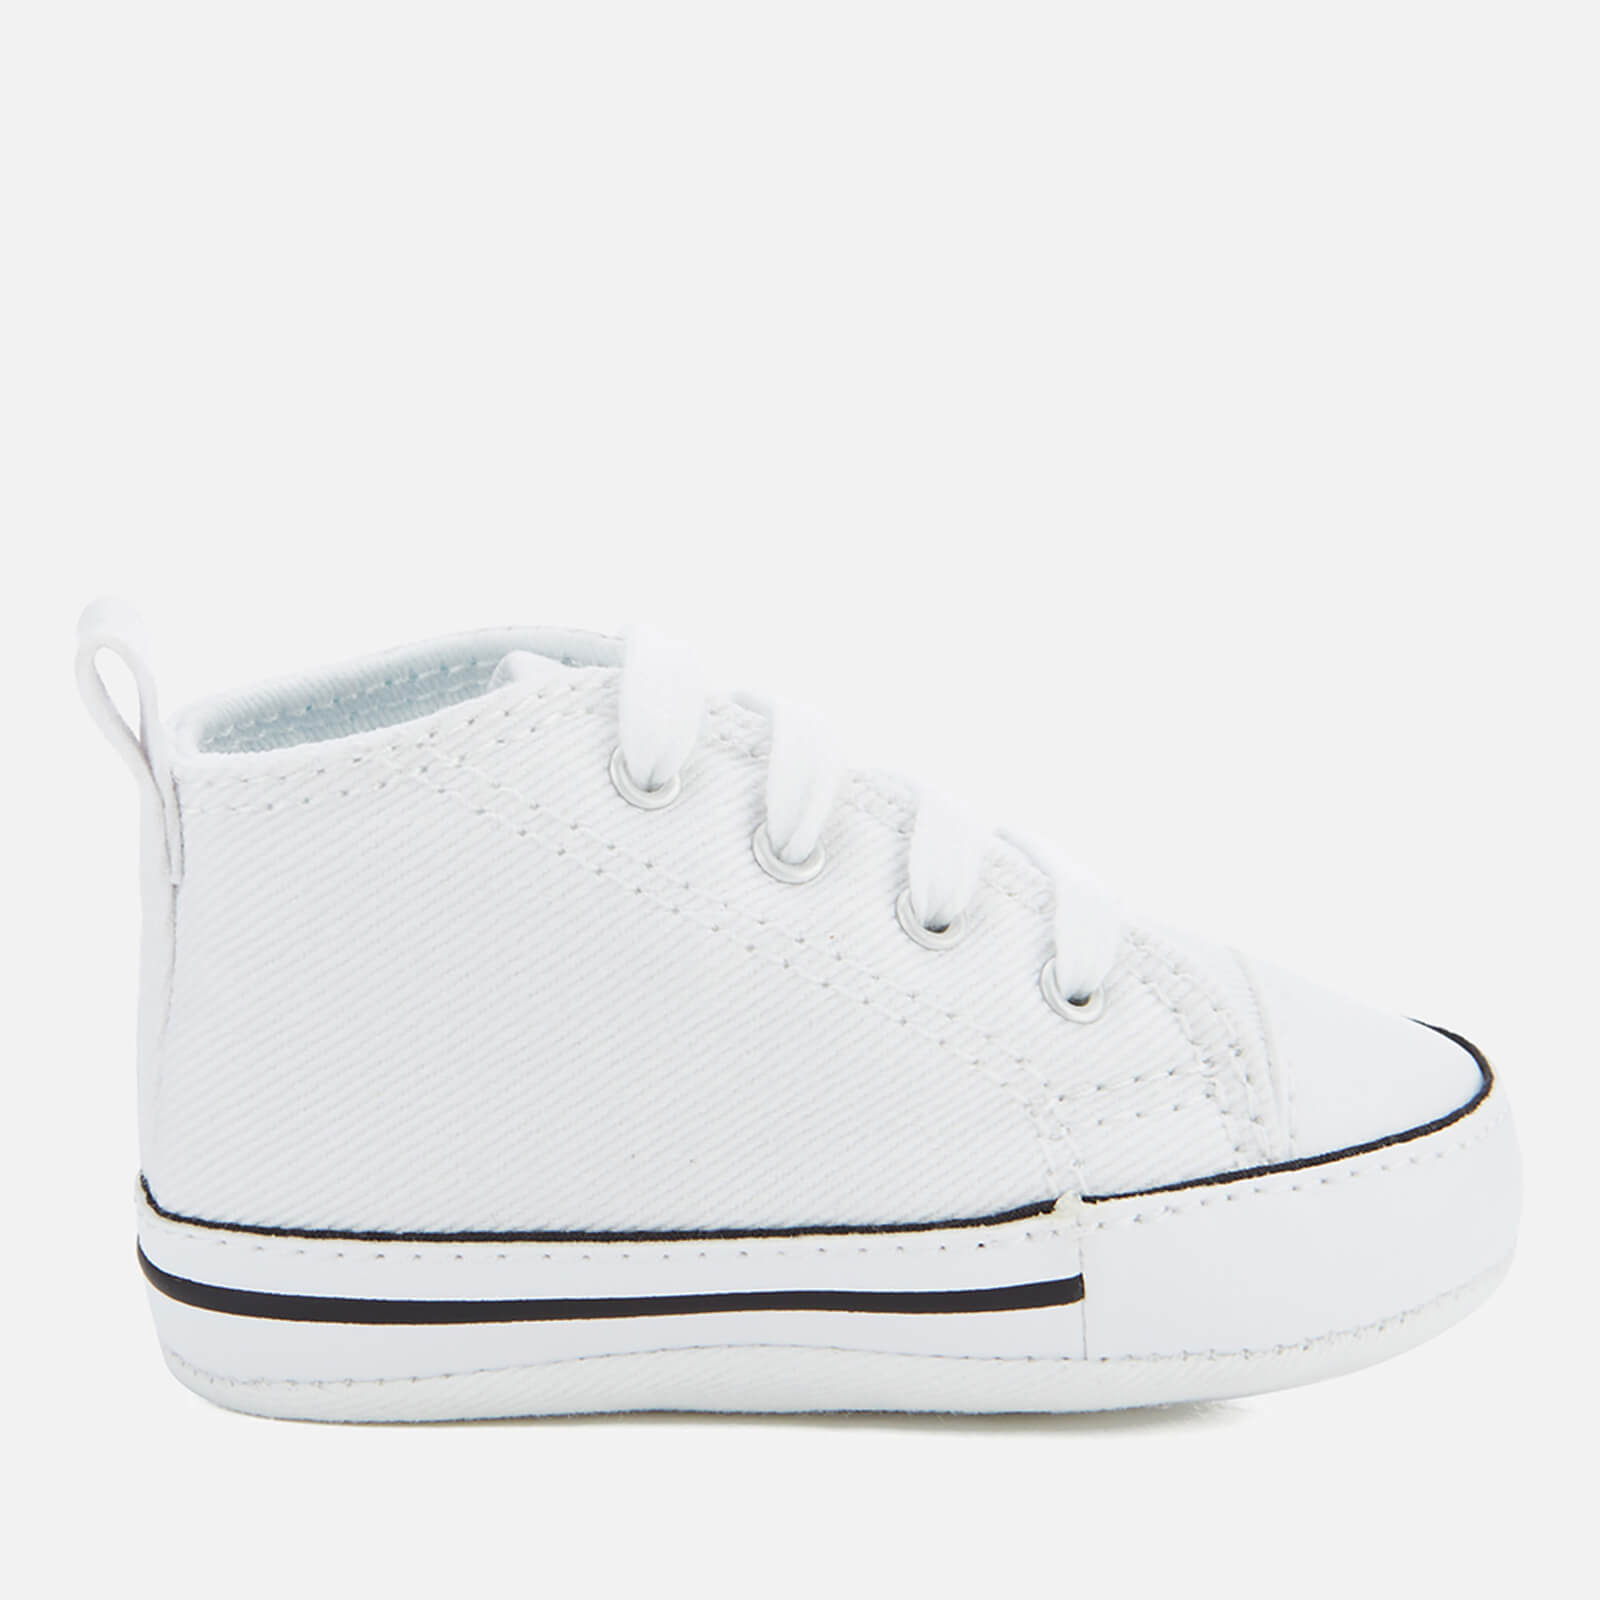 soft sole converse baby shoes